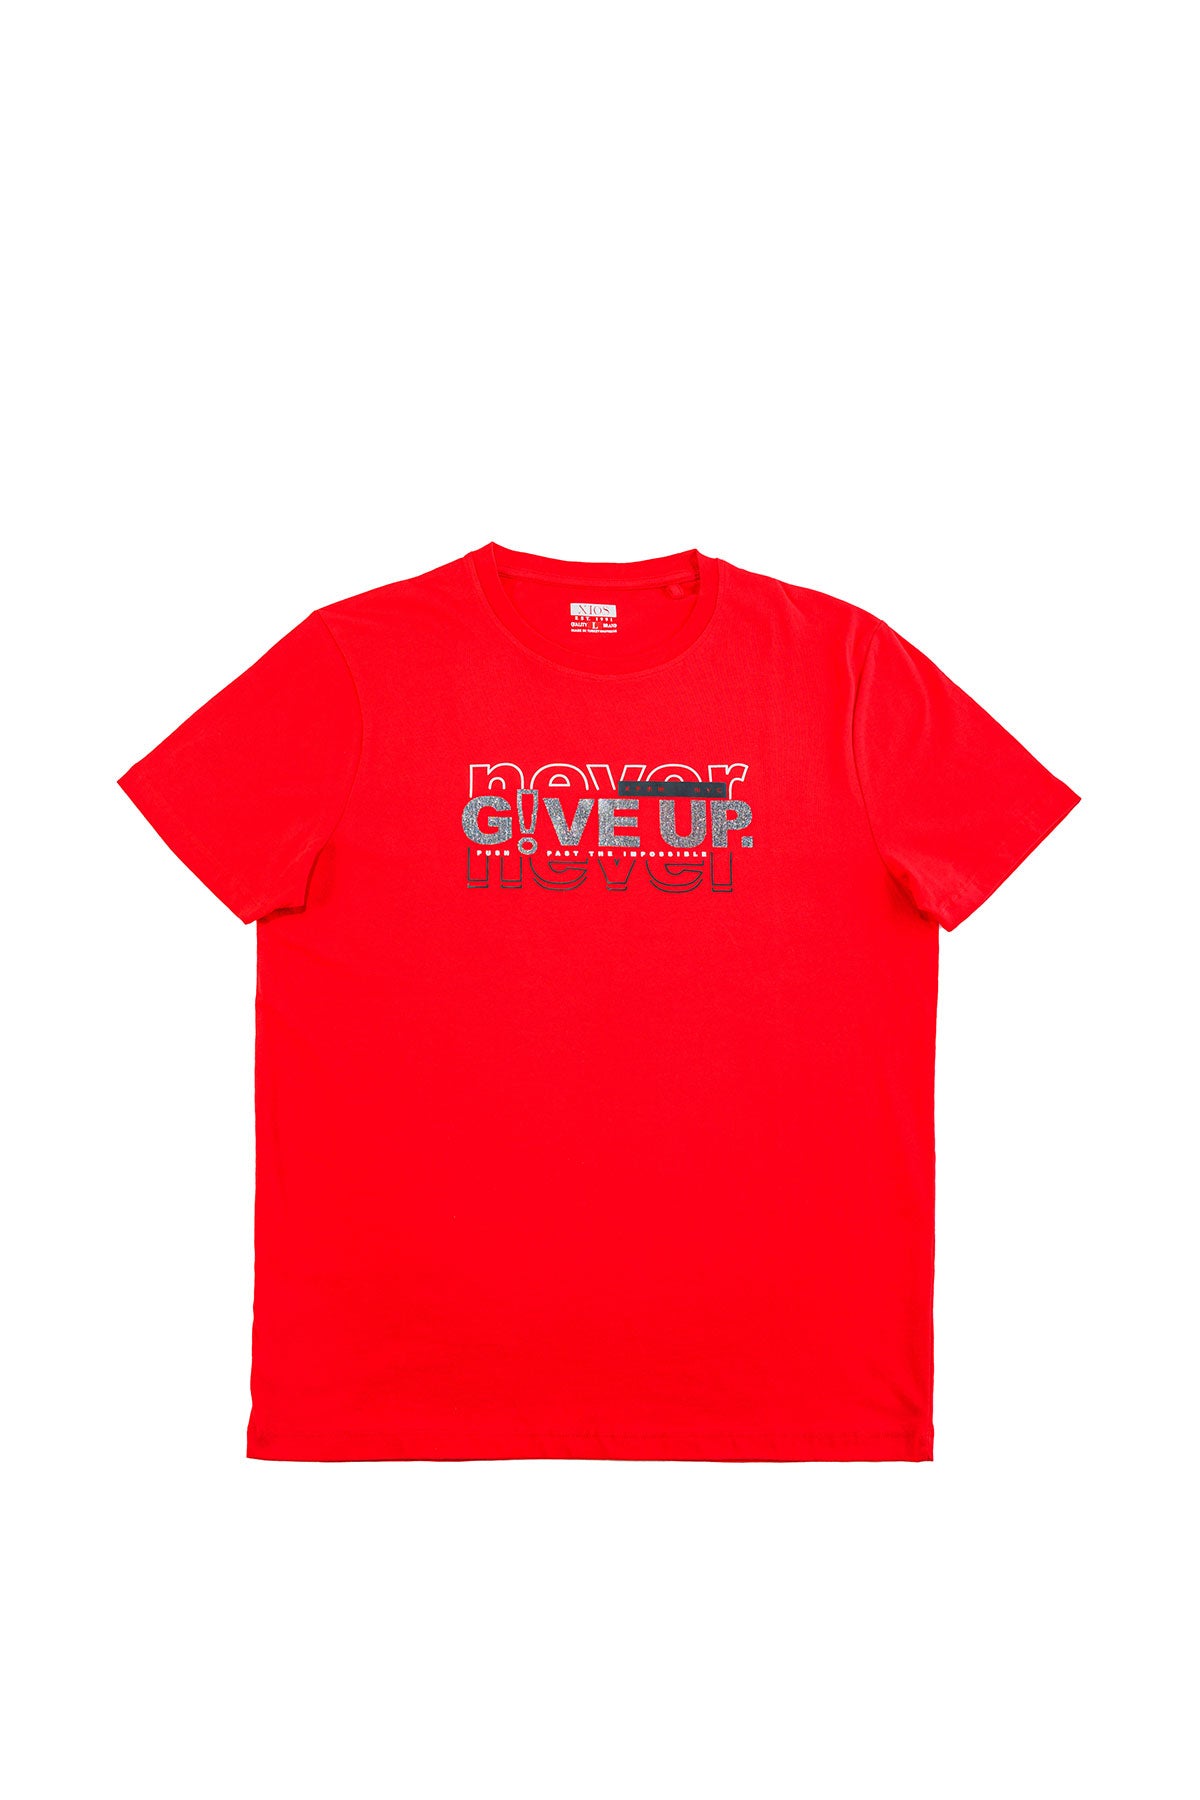 "Never Give Up" Graphic Tee